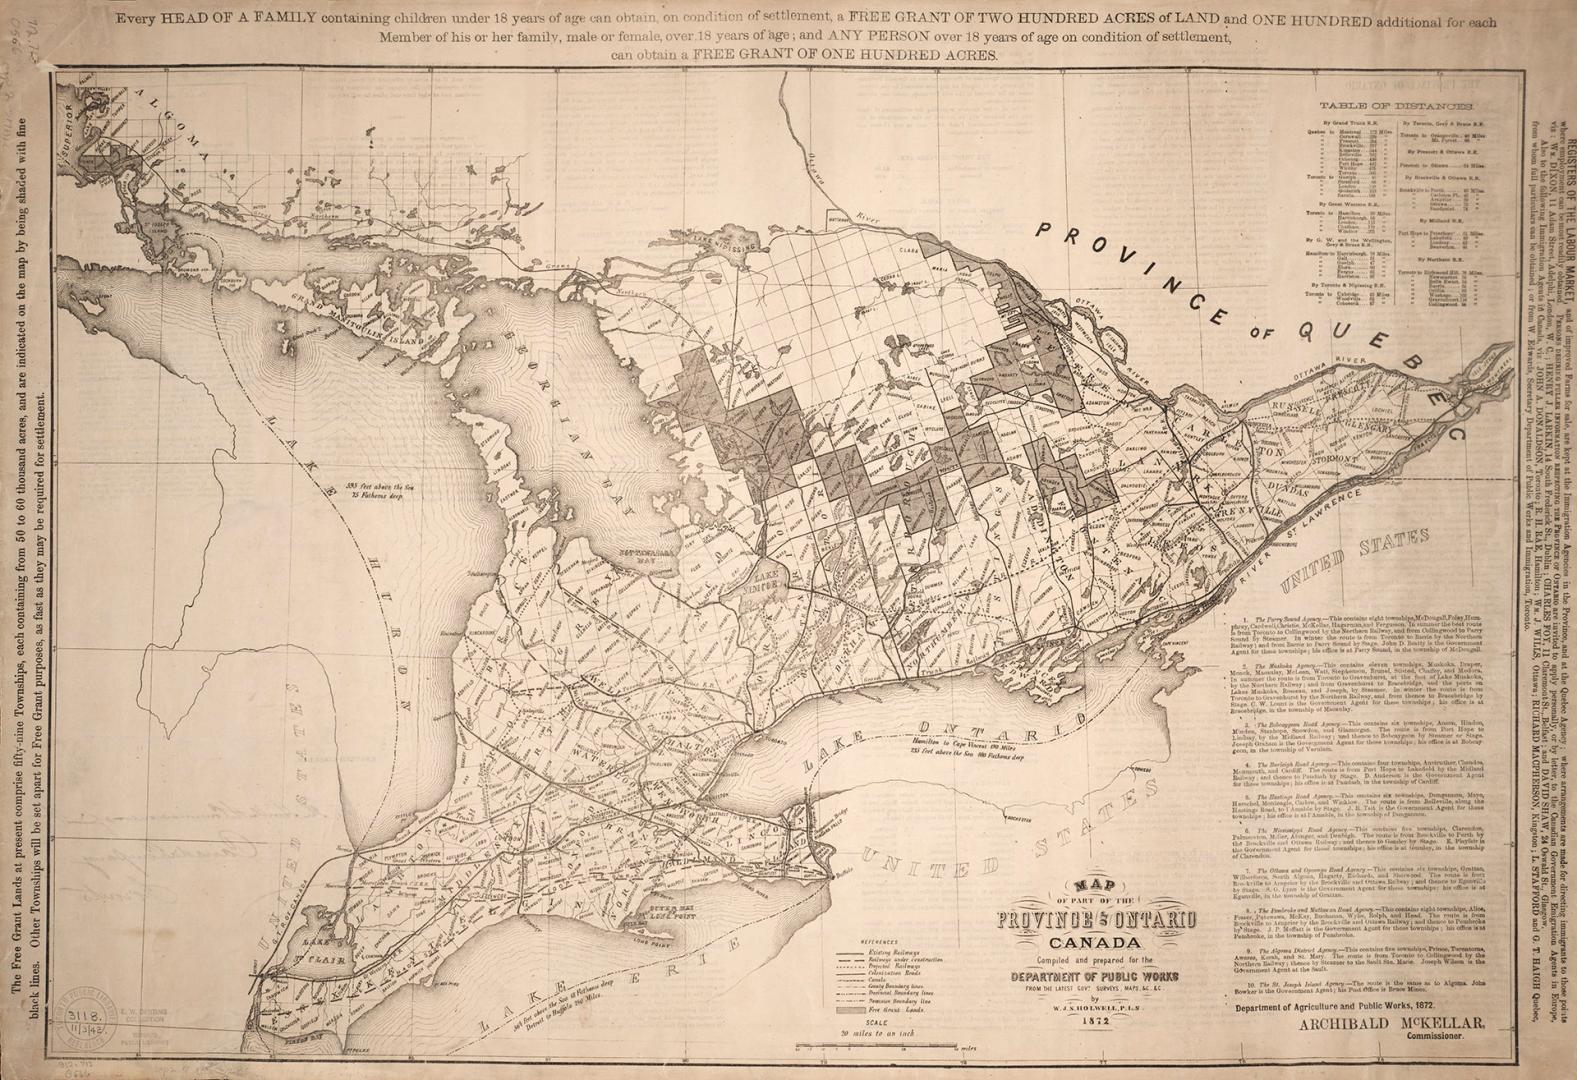 Map of part of the Province of Ontario Canada